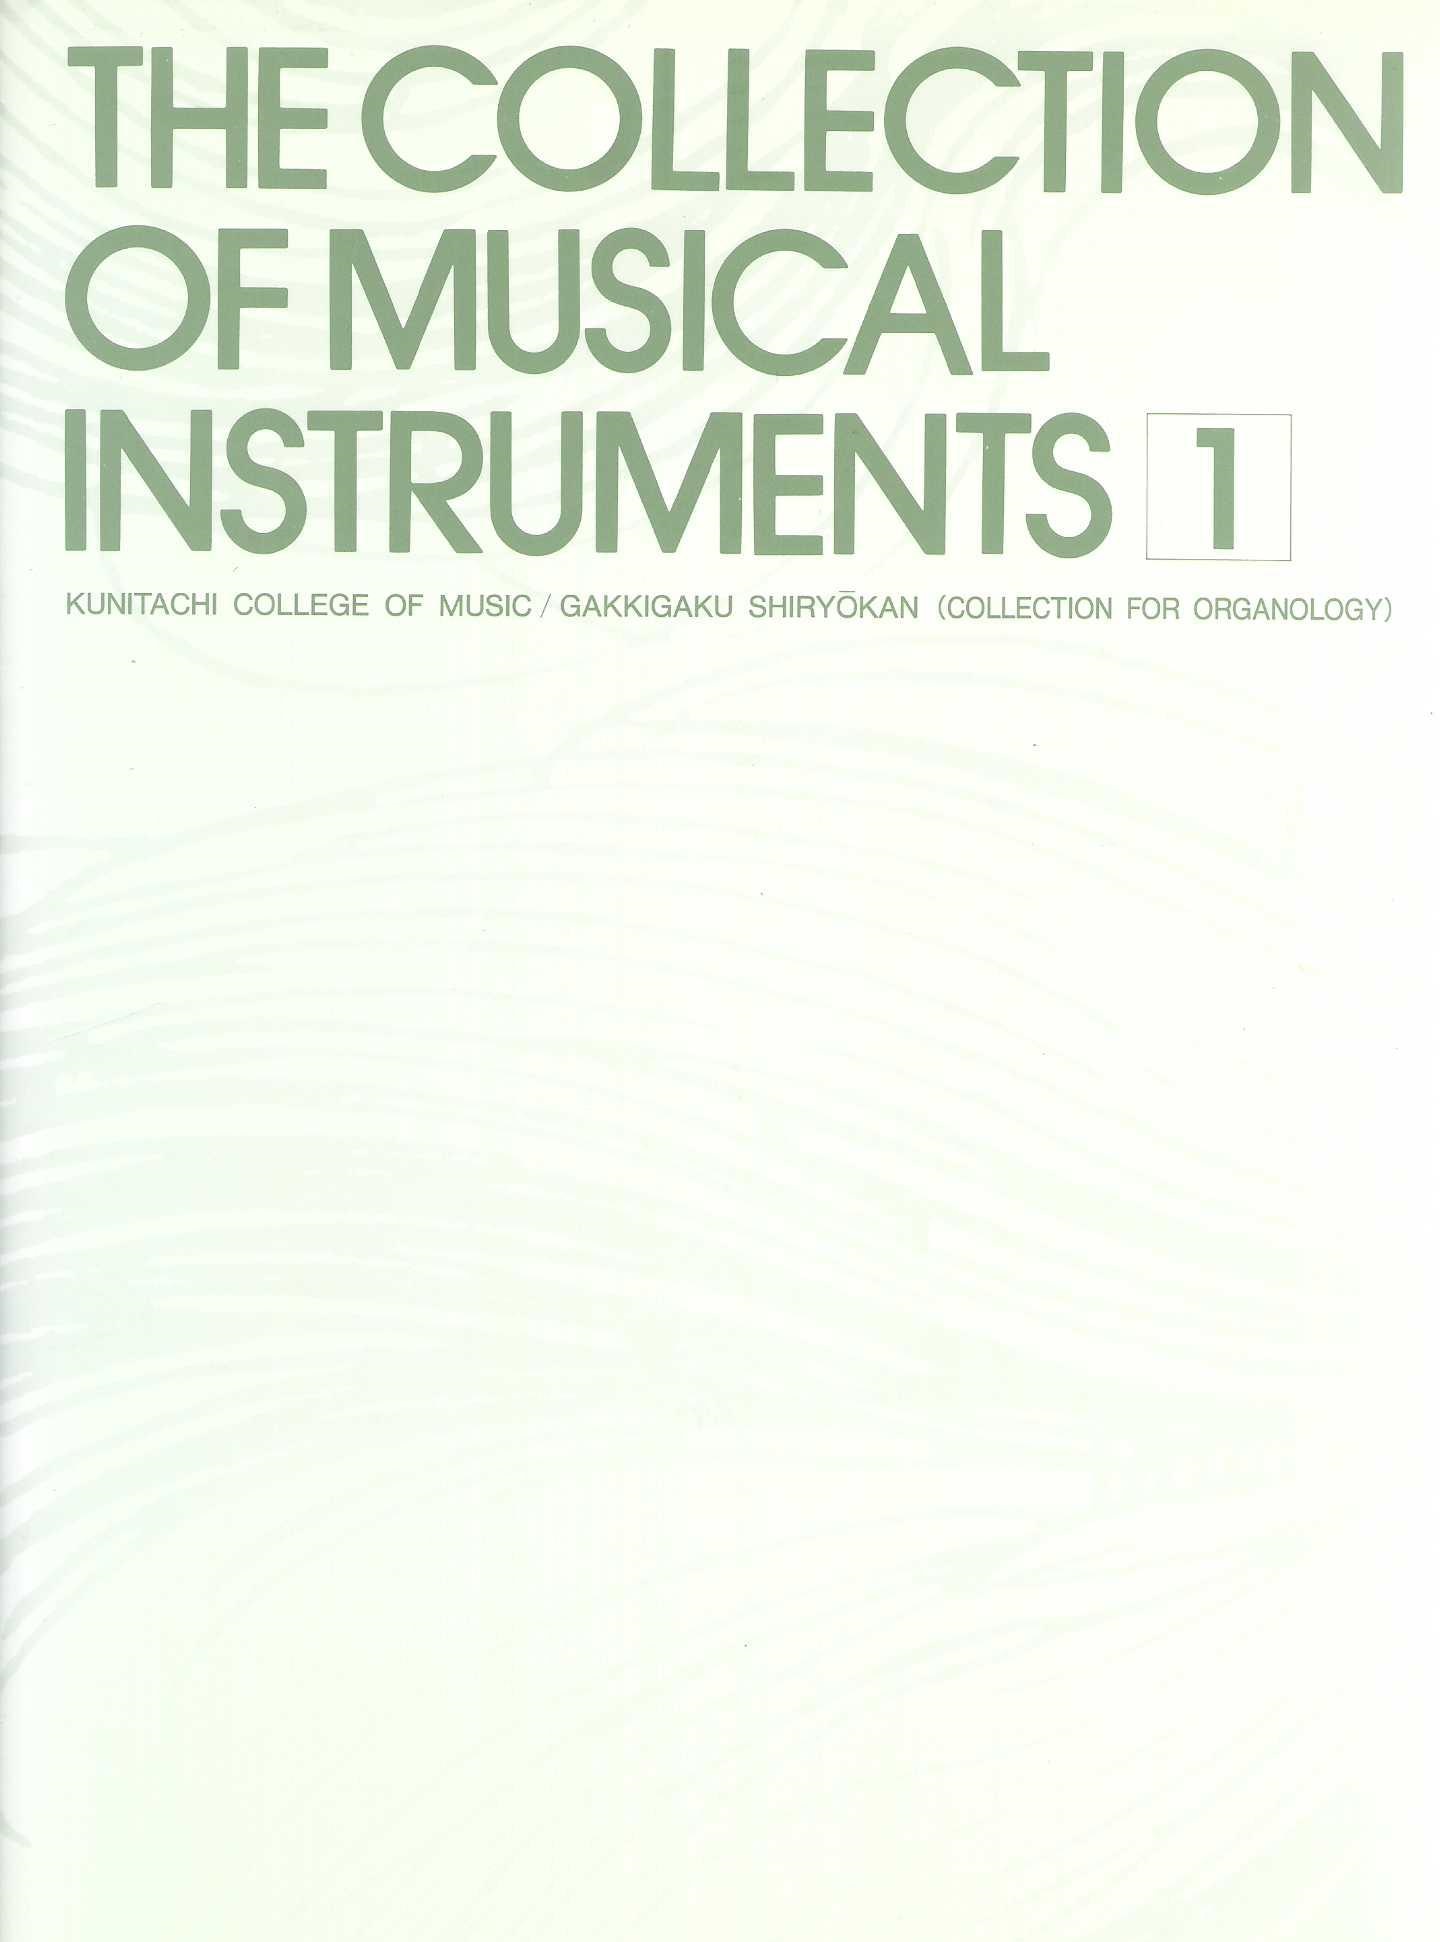 THE COLLECTION OF MUSICAL INSTRUMENTS 1